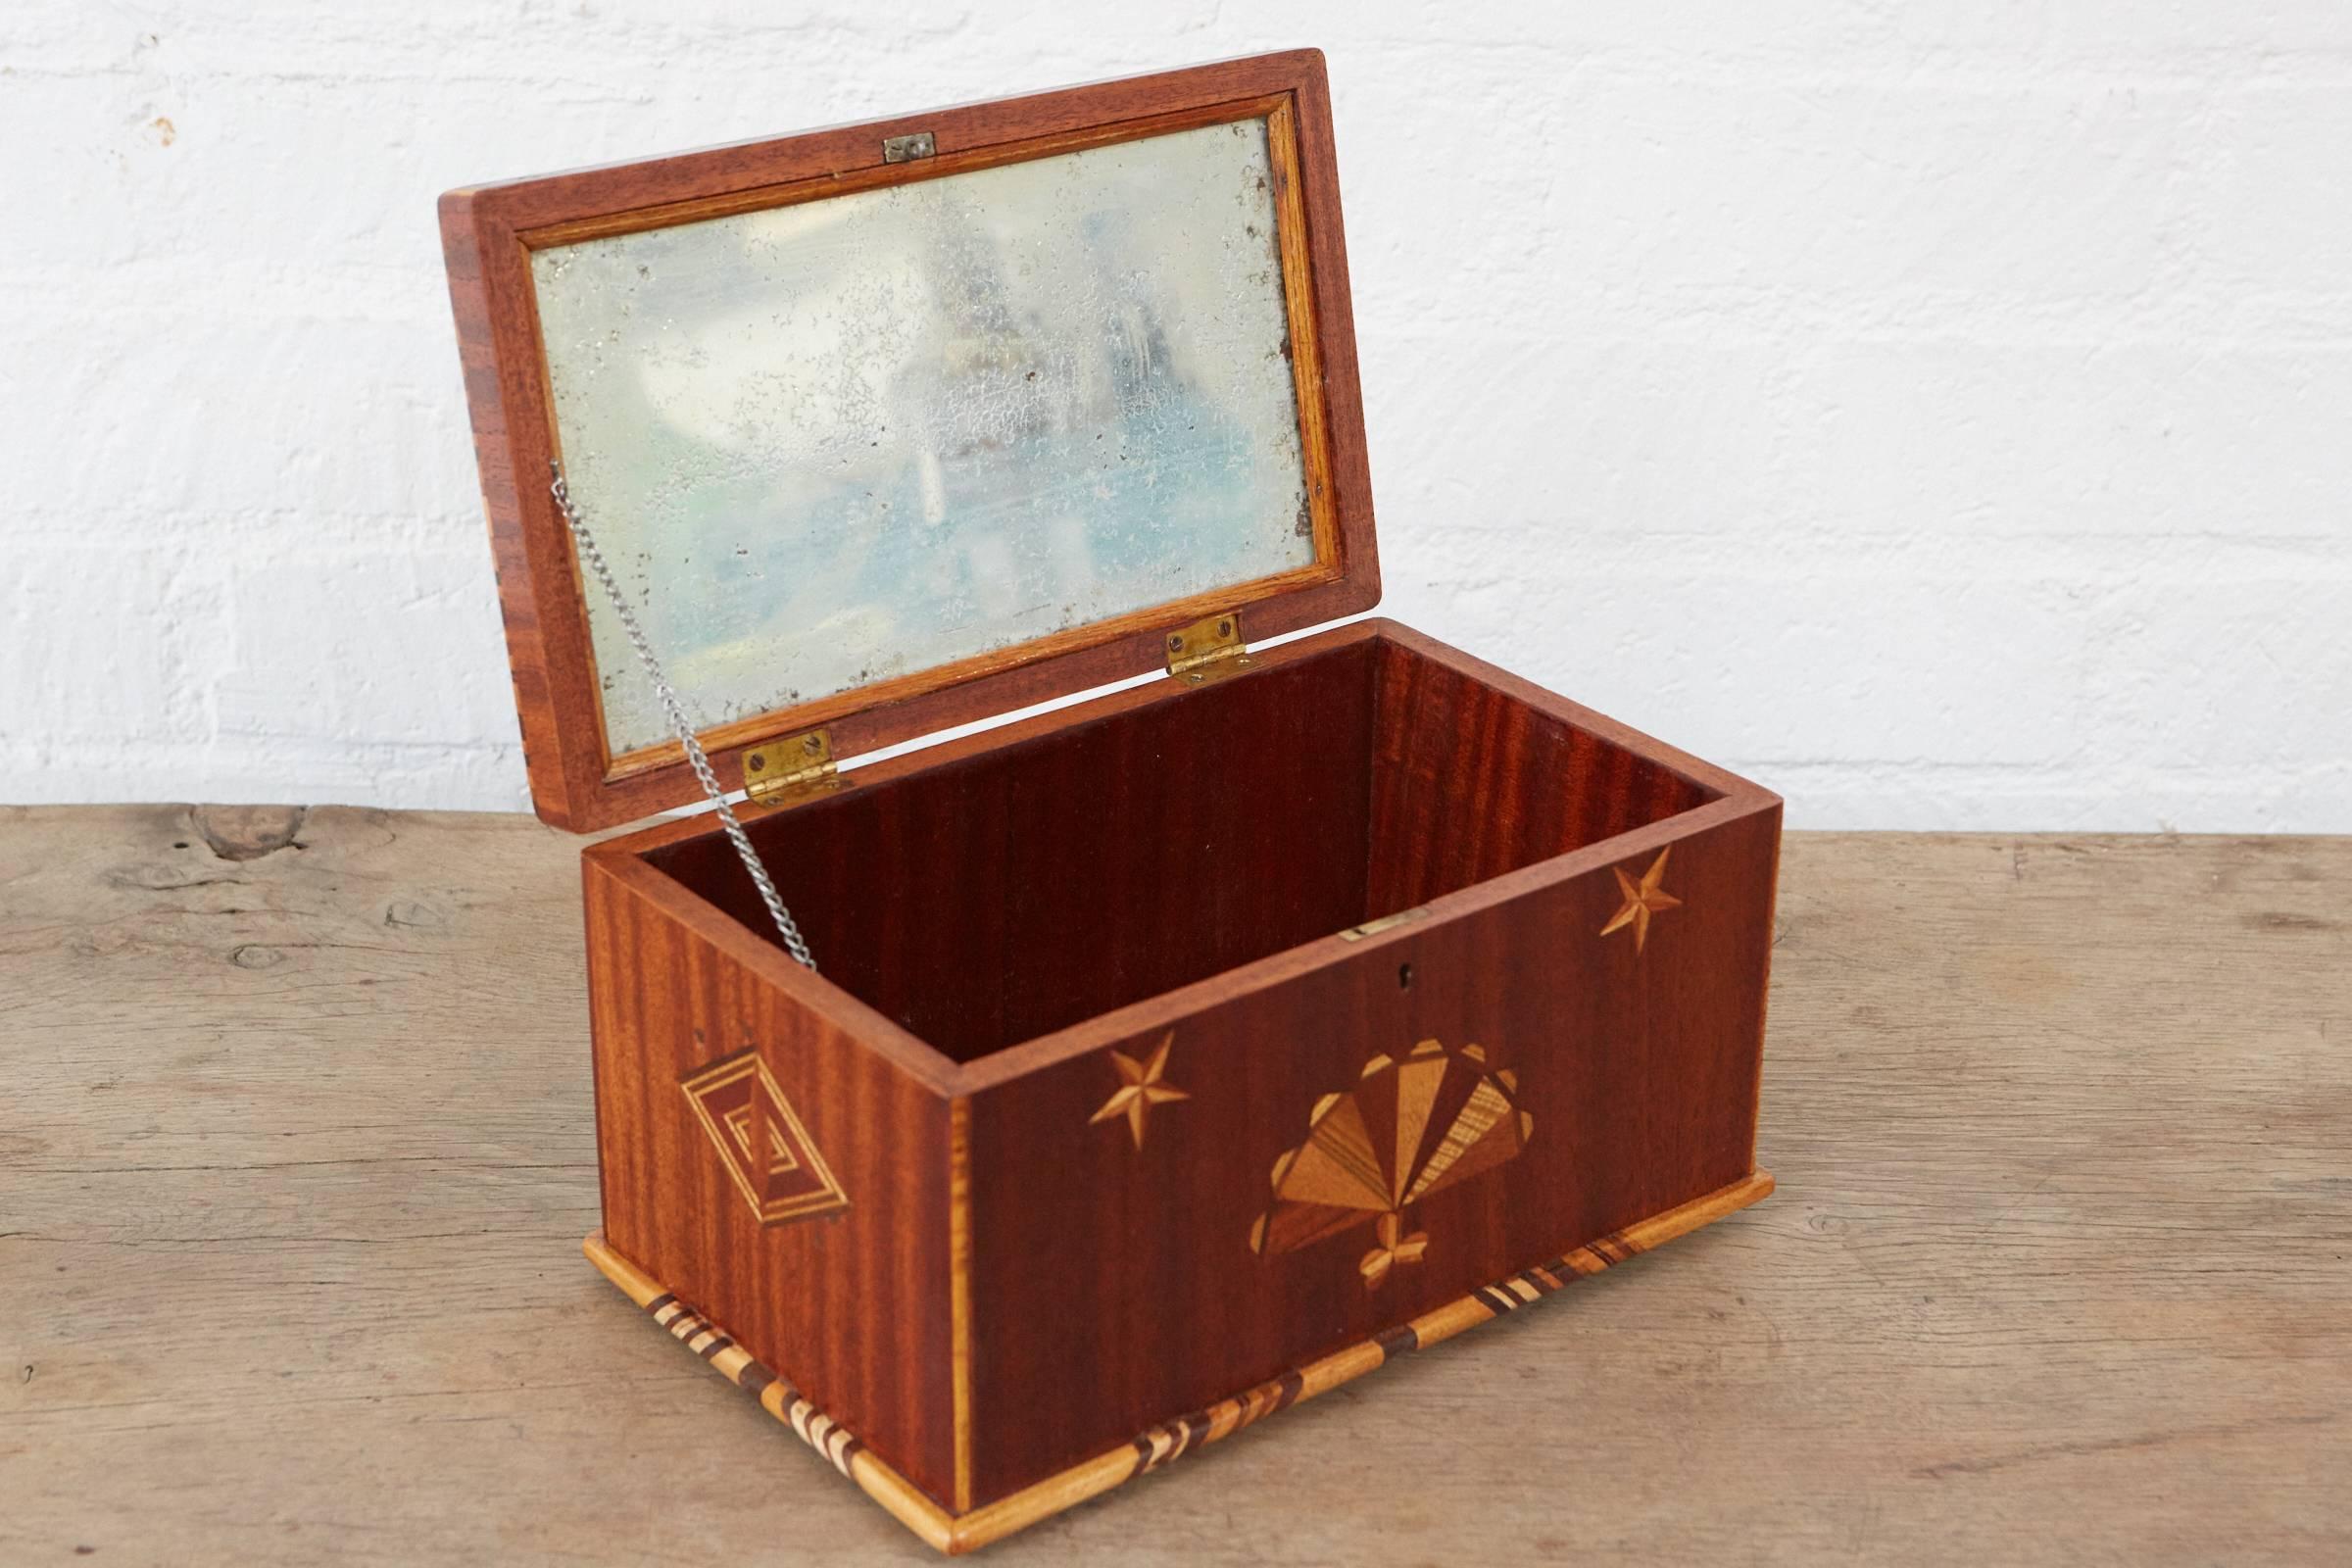 This antique keepsake box is beautifully inlaid with an American flag, stars and abstract interlocking patterns. This box has very nice examples parquetry throughout. The interior of the lid has an original mirror made with foil and glass that has a